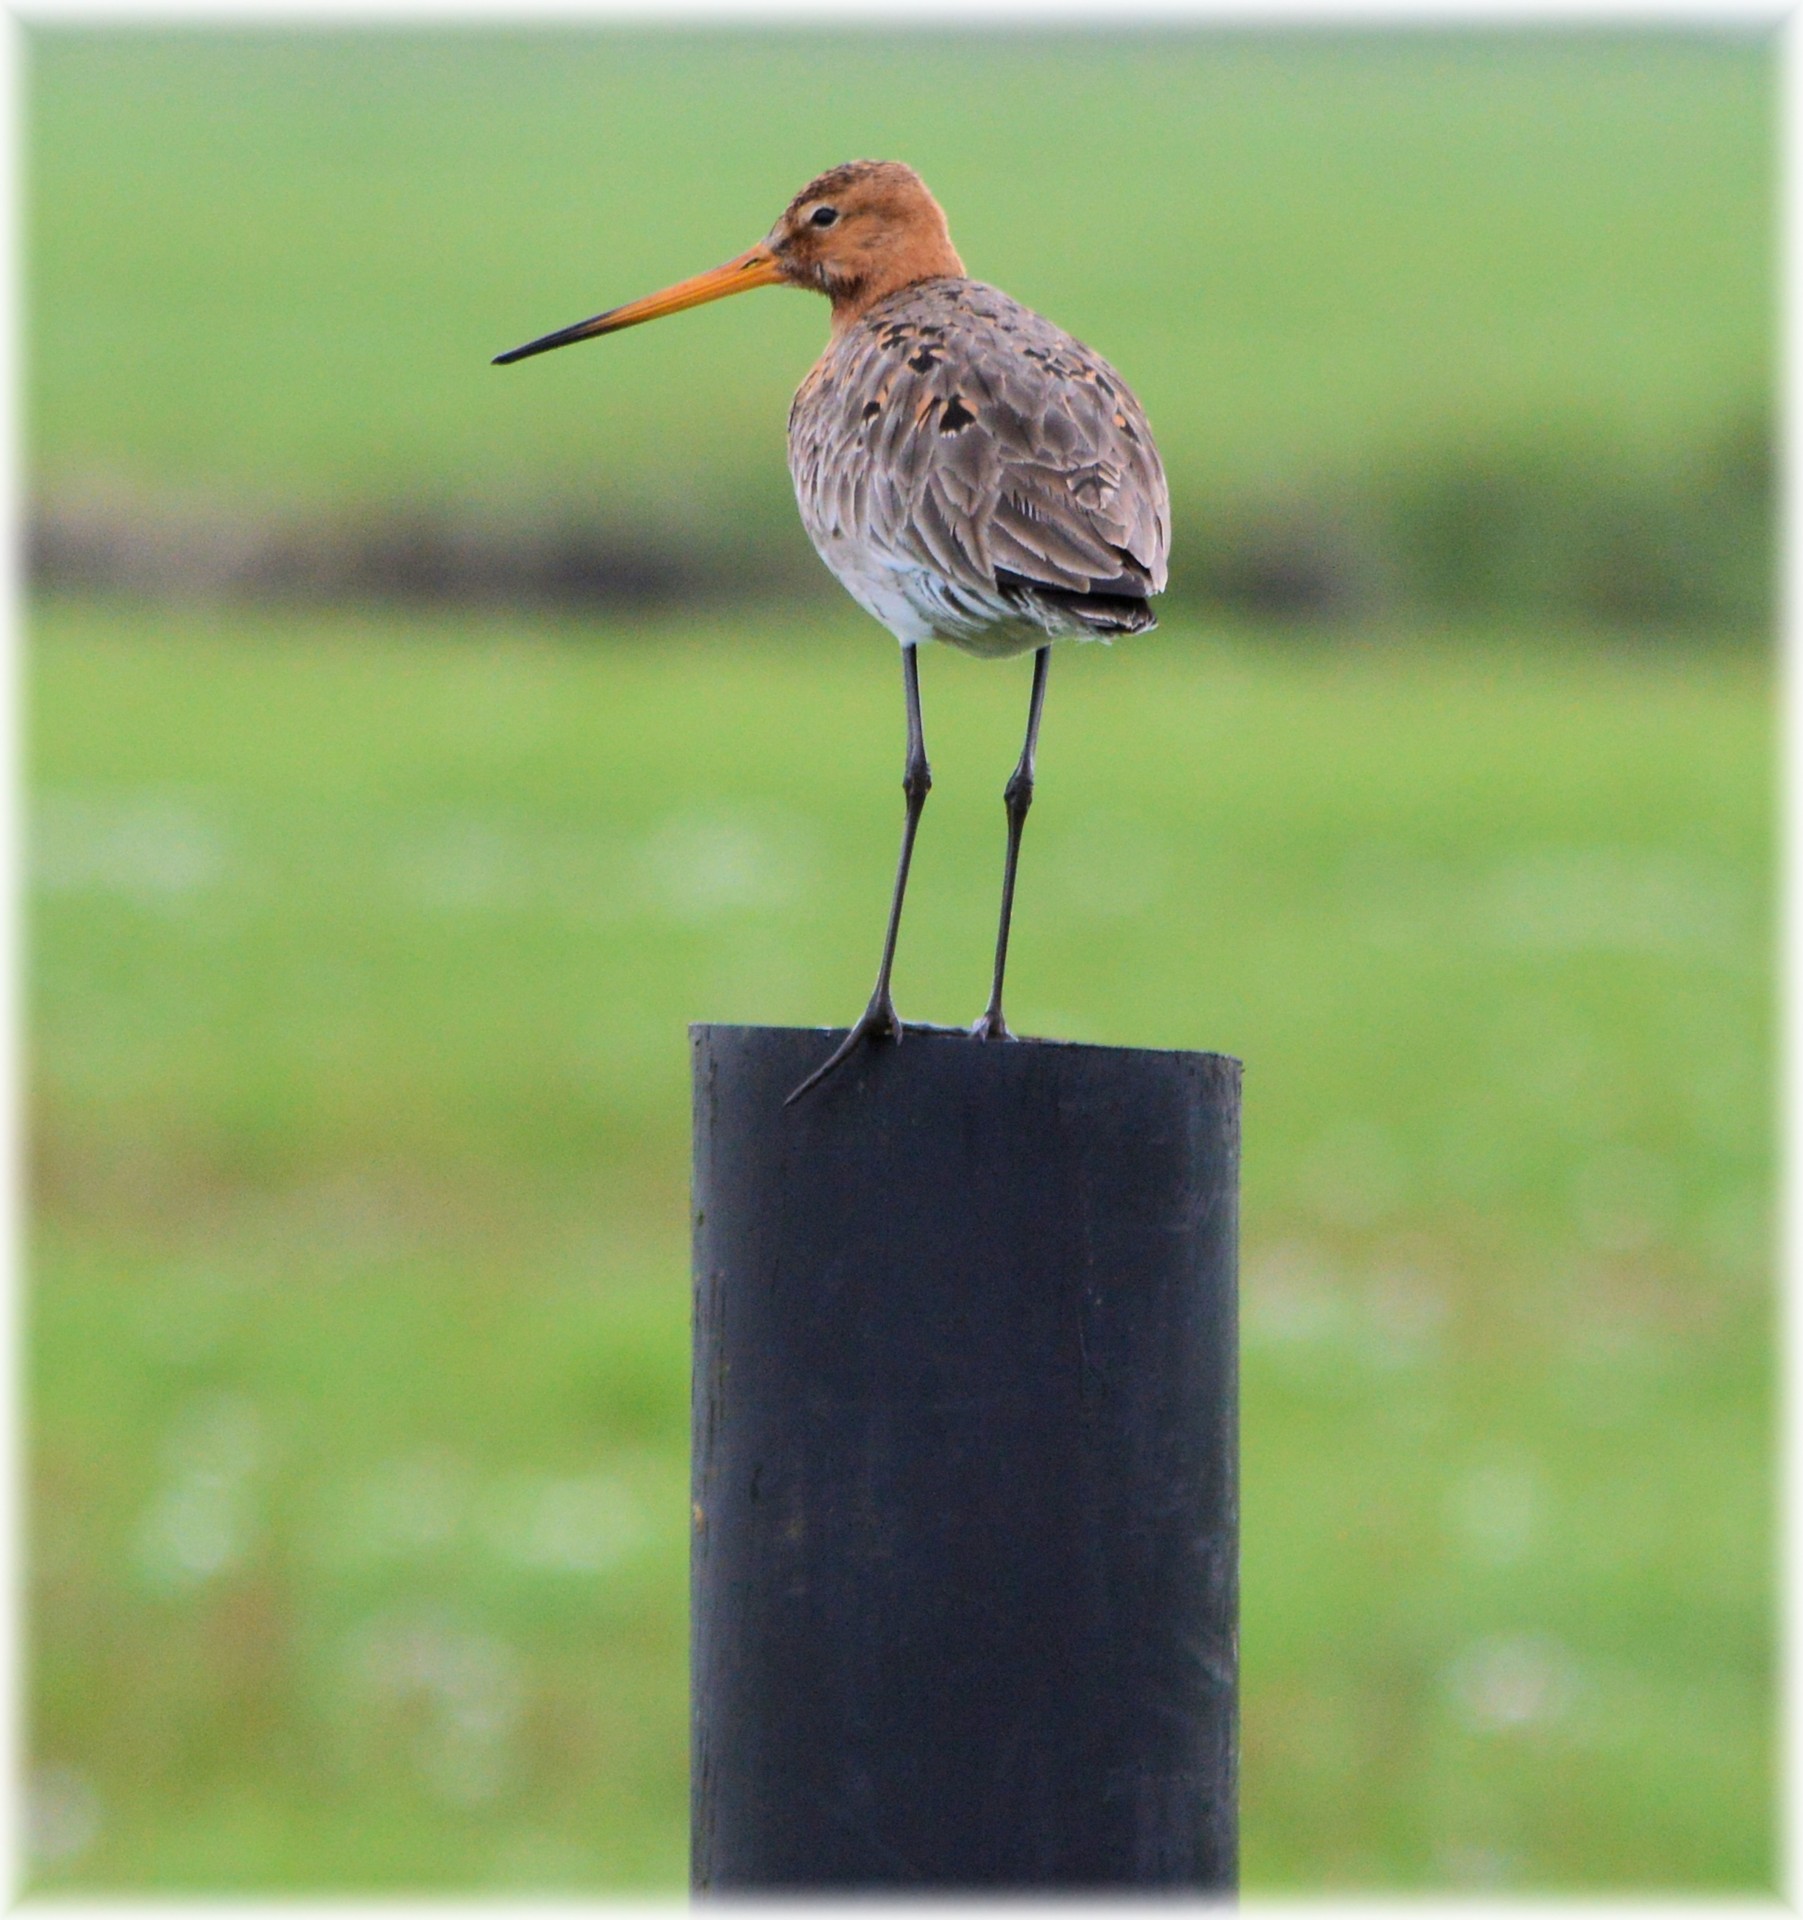 curlew bird nature free photo